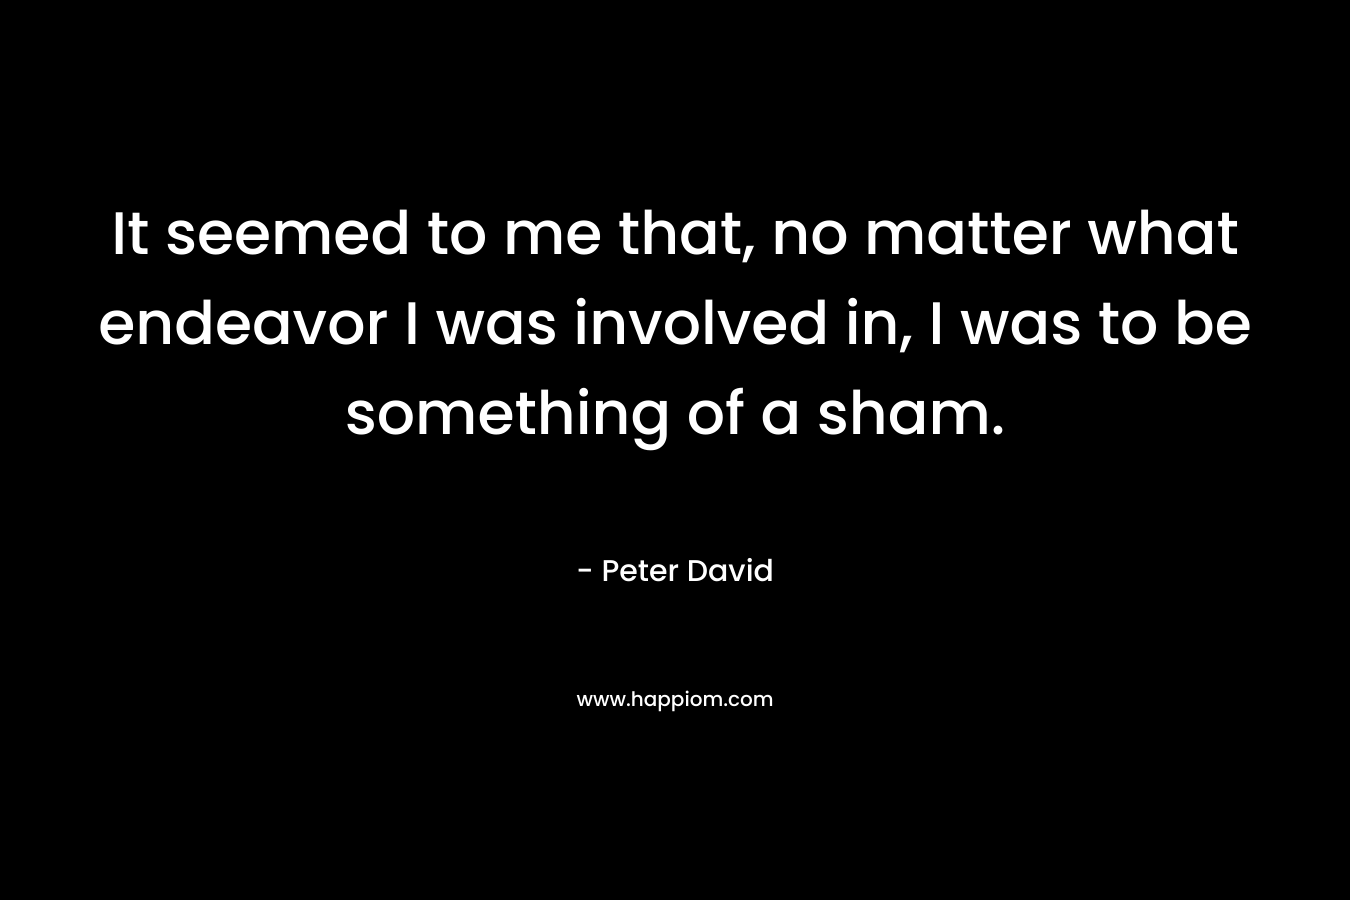 It seemed to me that, no matter what endeavor I was involved in, I was to be something of a sham.